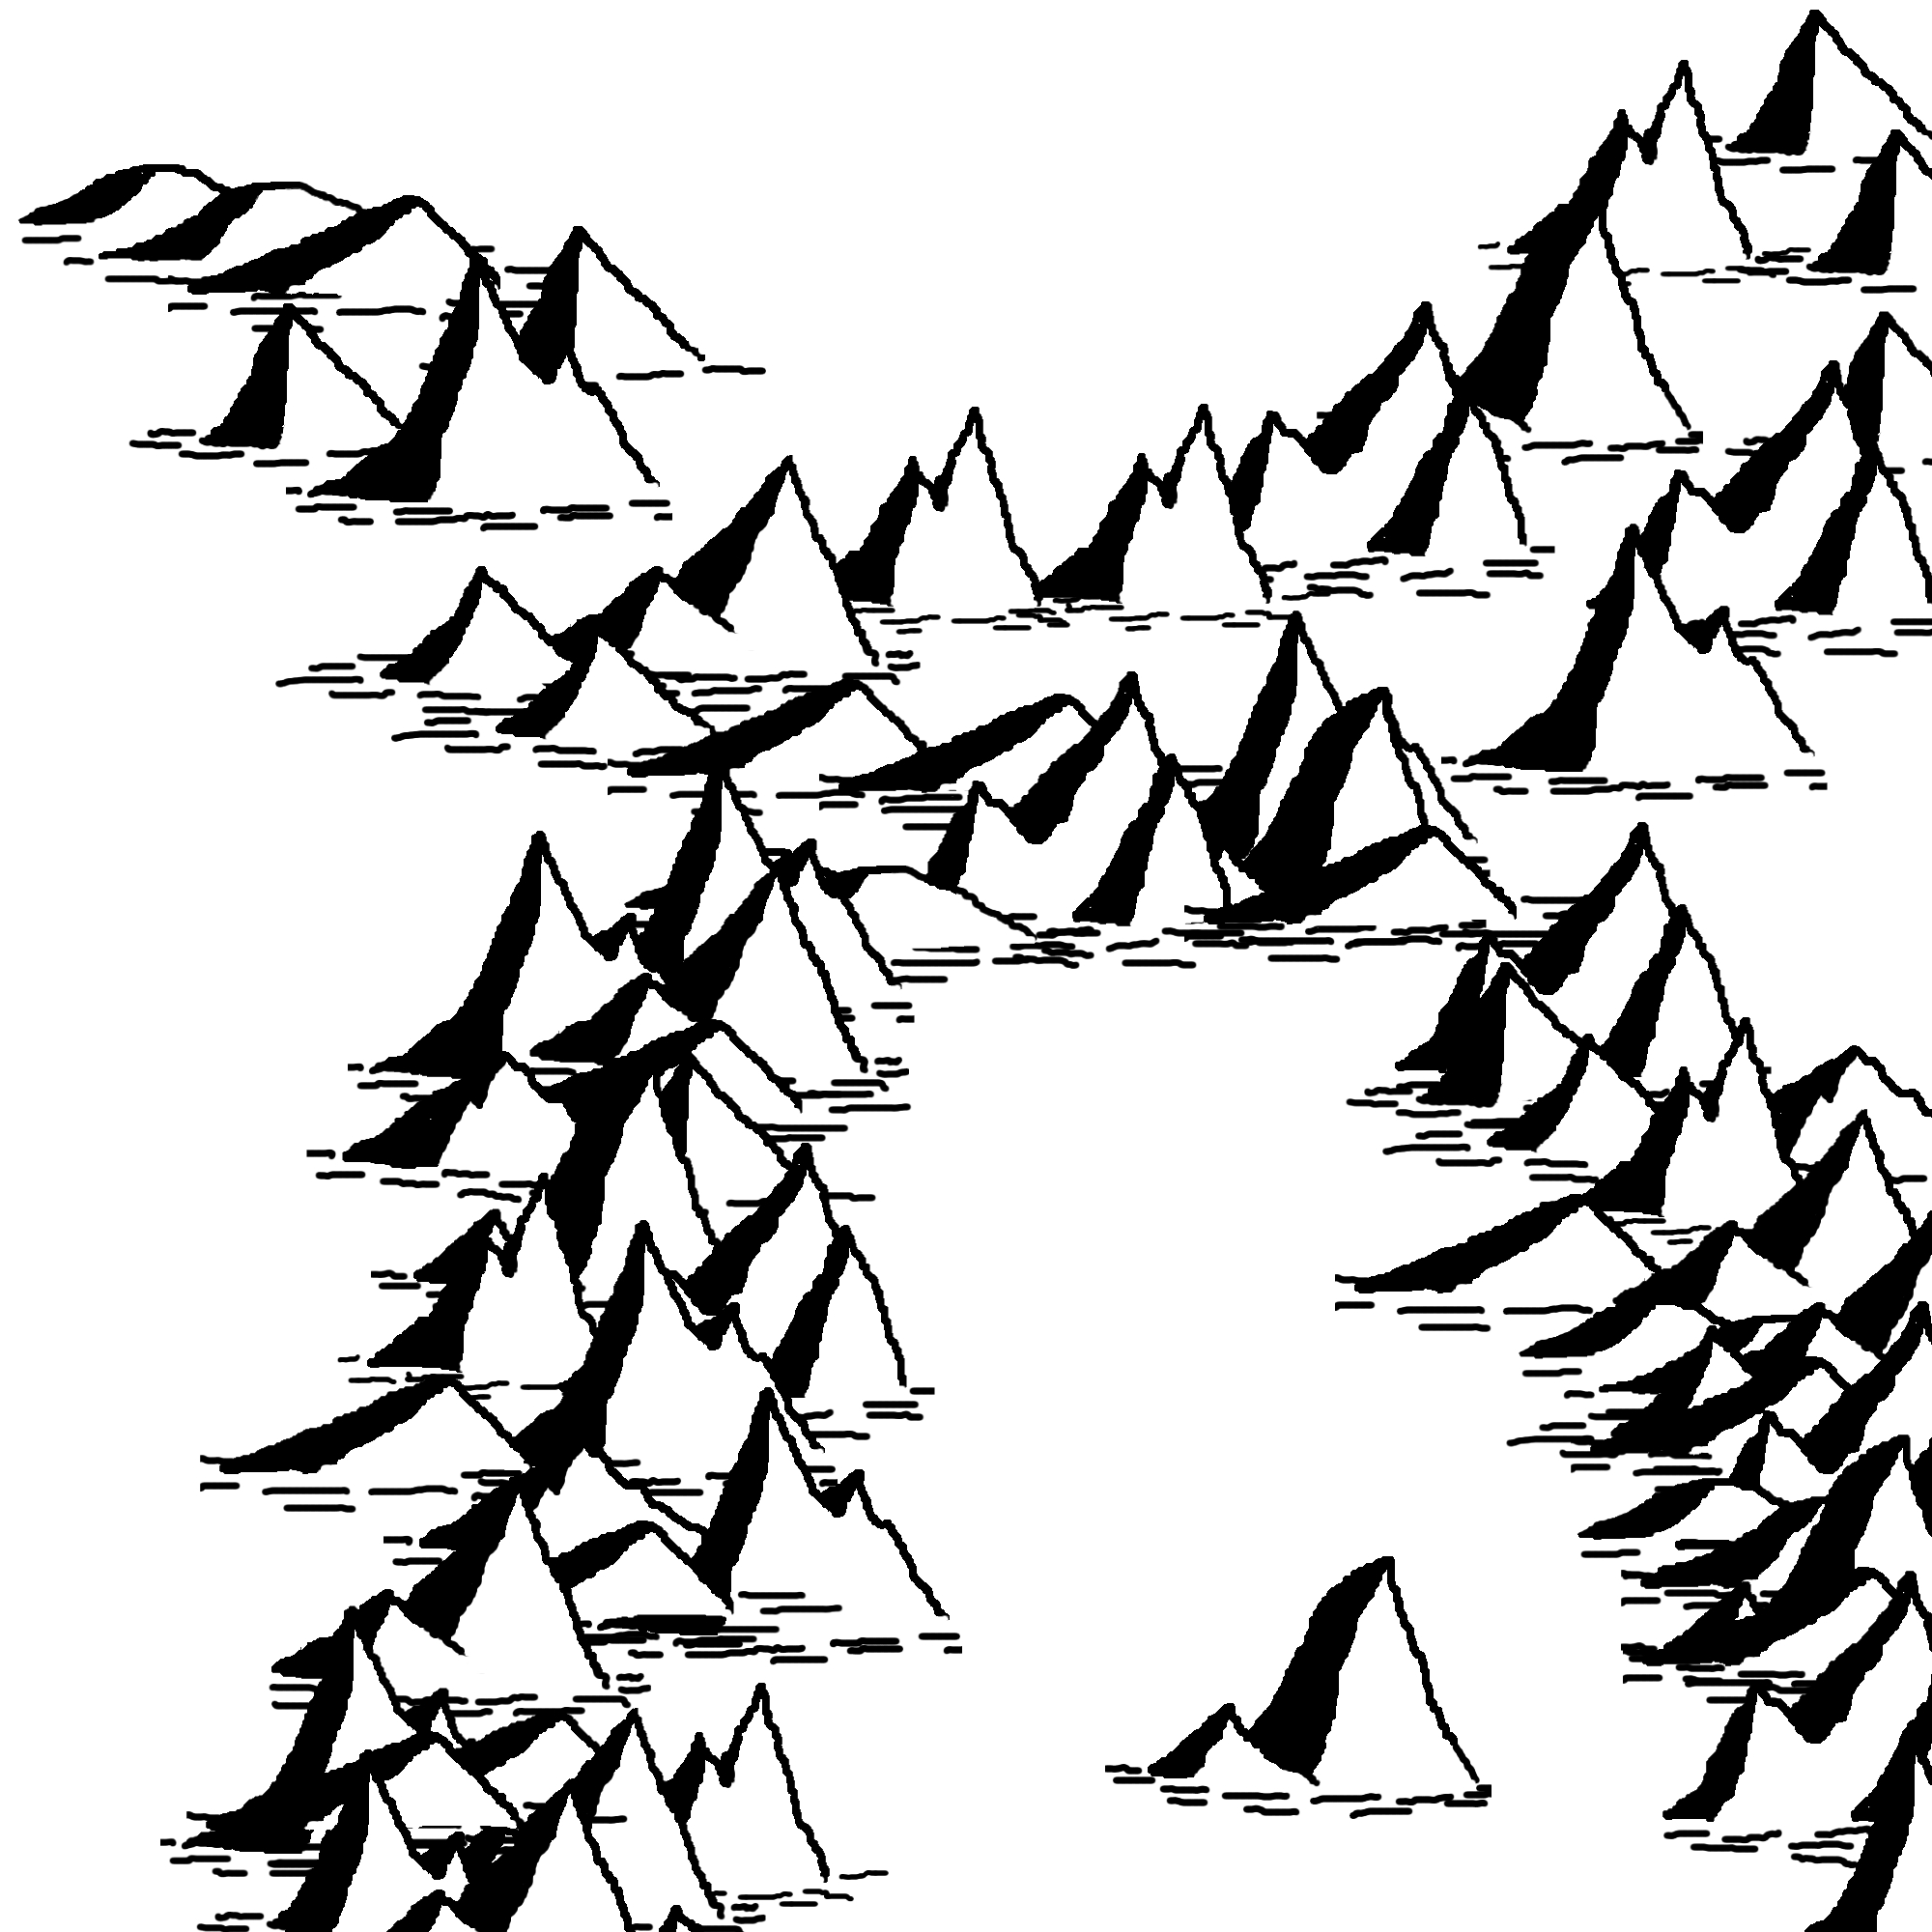 Makin' mountains and makin' trees. | Cartographic Principles in ...